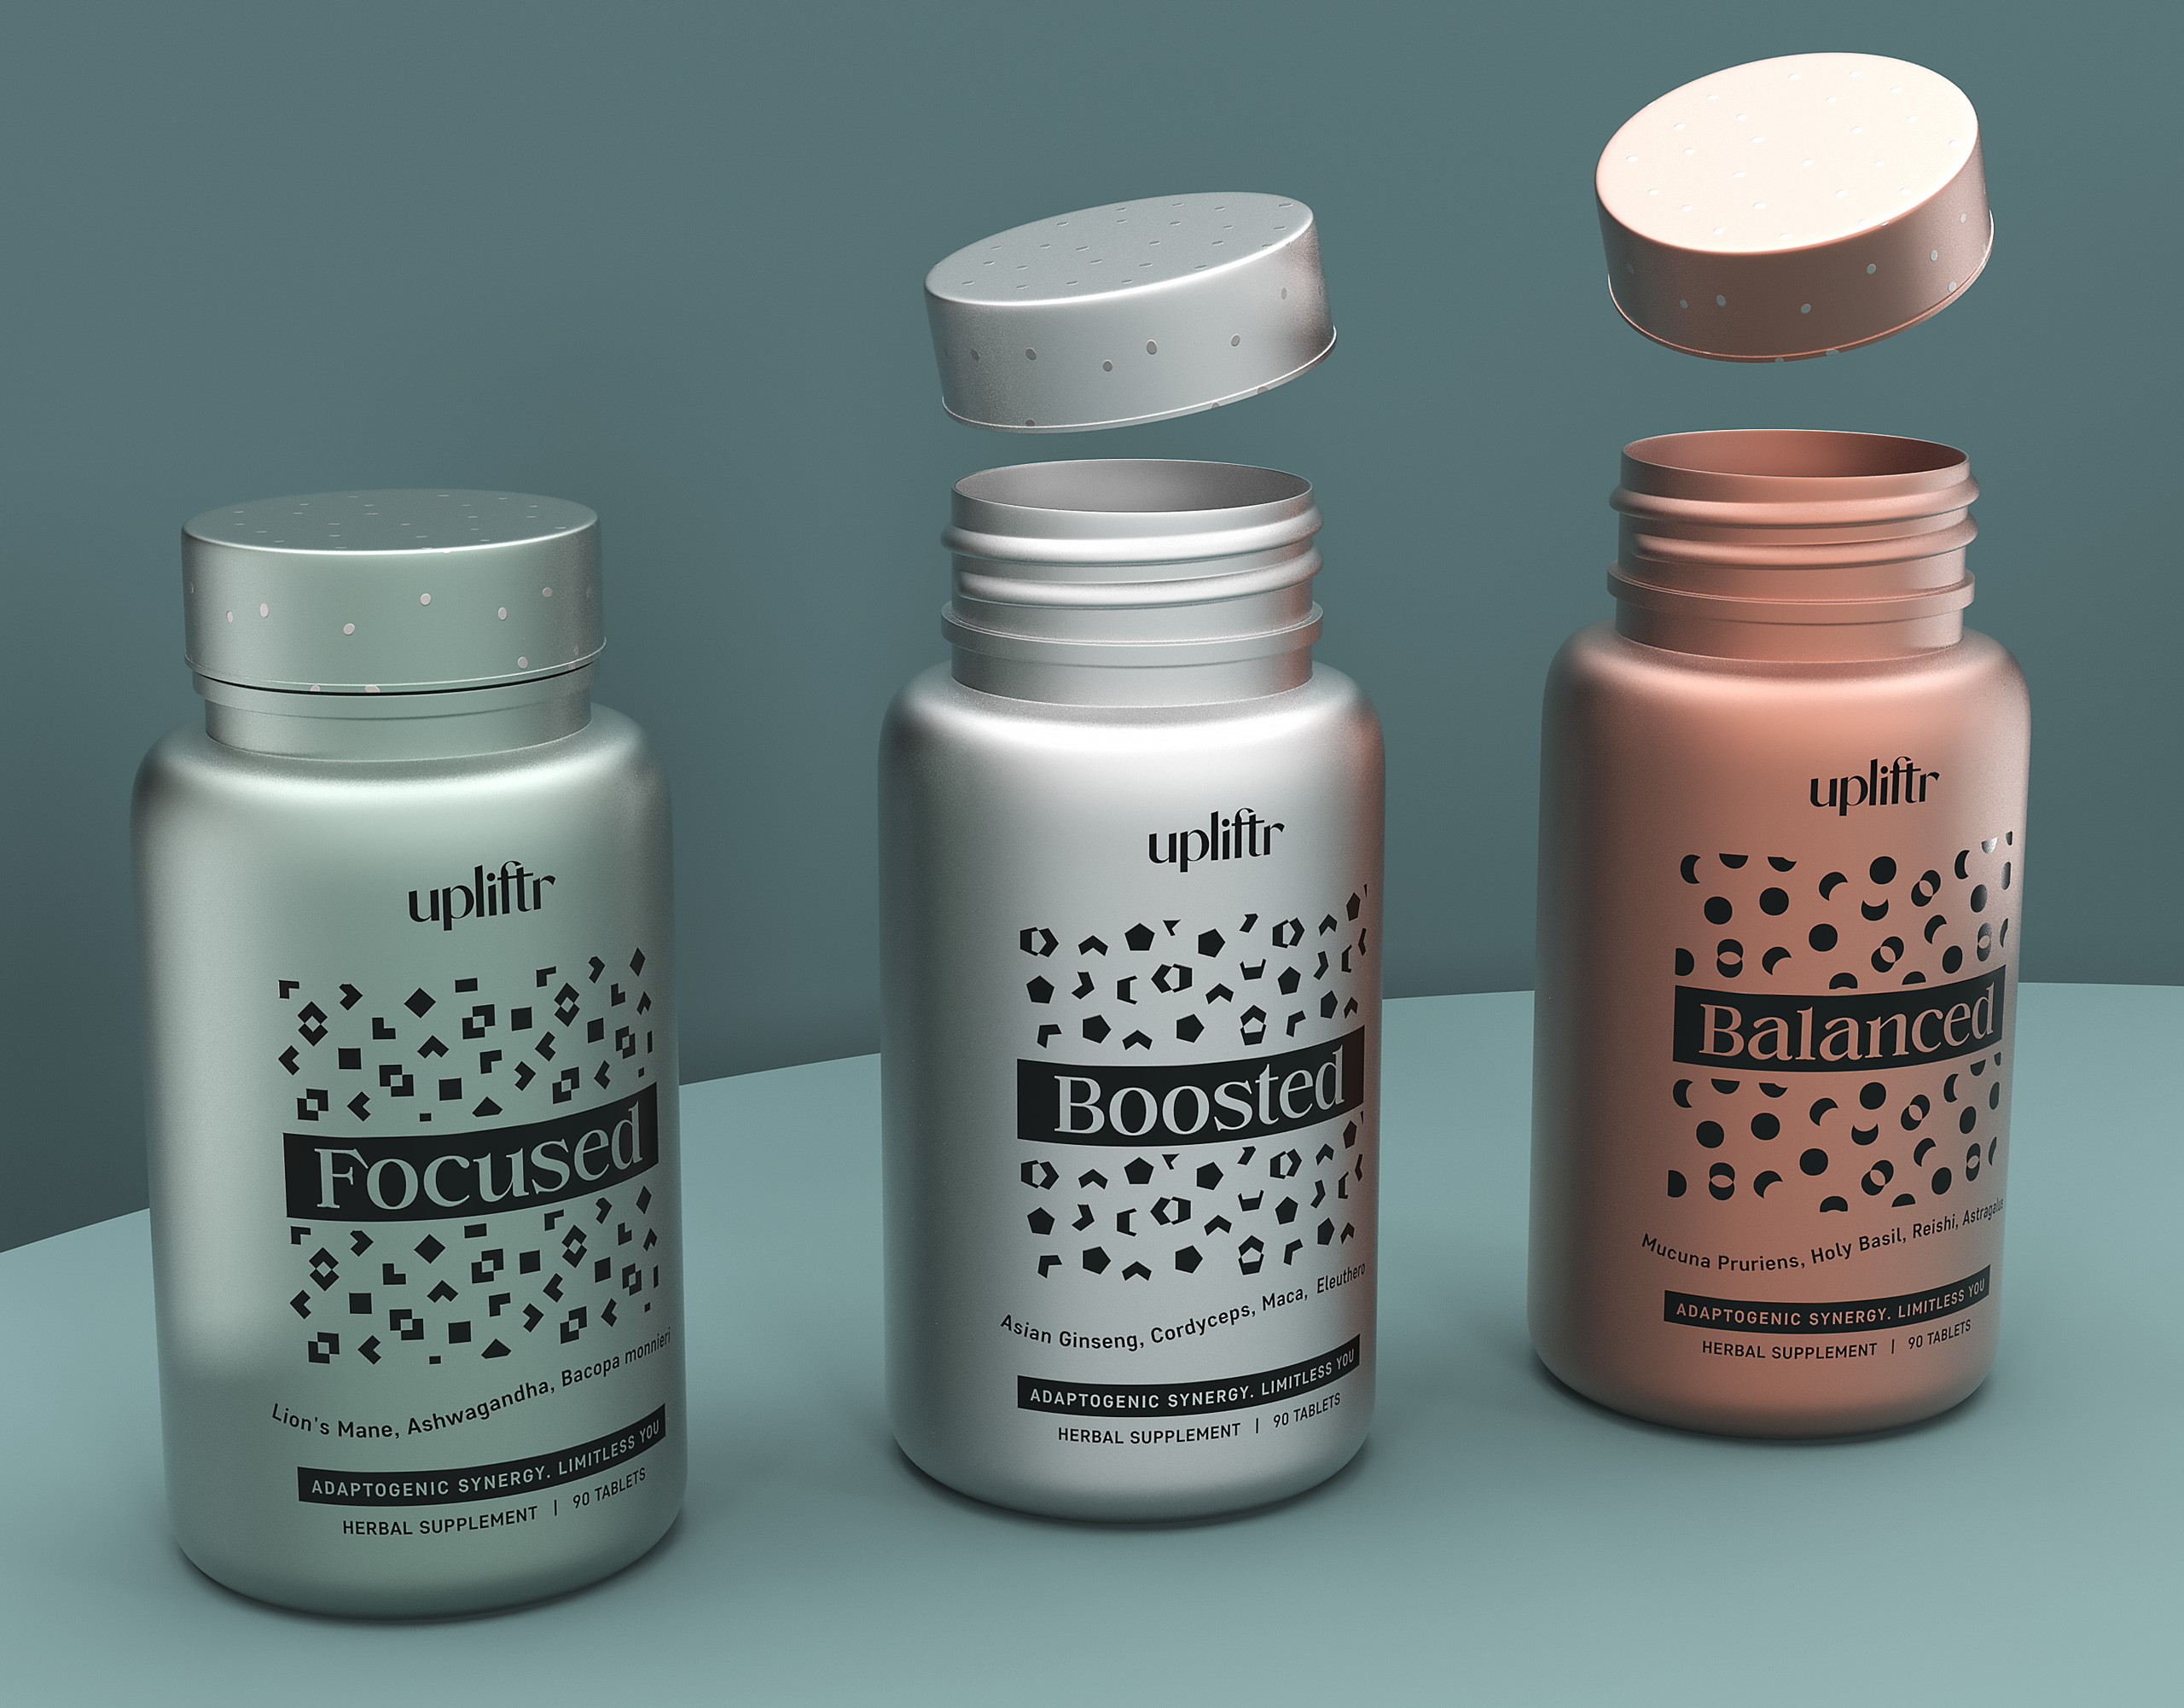 Matrafox Studio Created a Sustainable Brand Identity and Packaging Solution for Upliftr Herbal Supplements